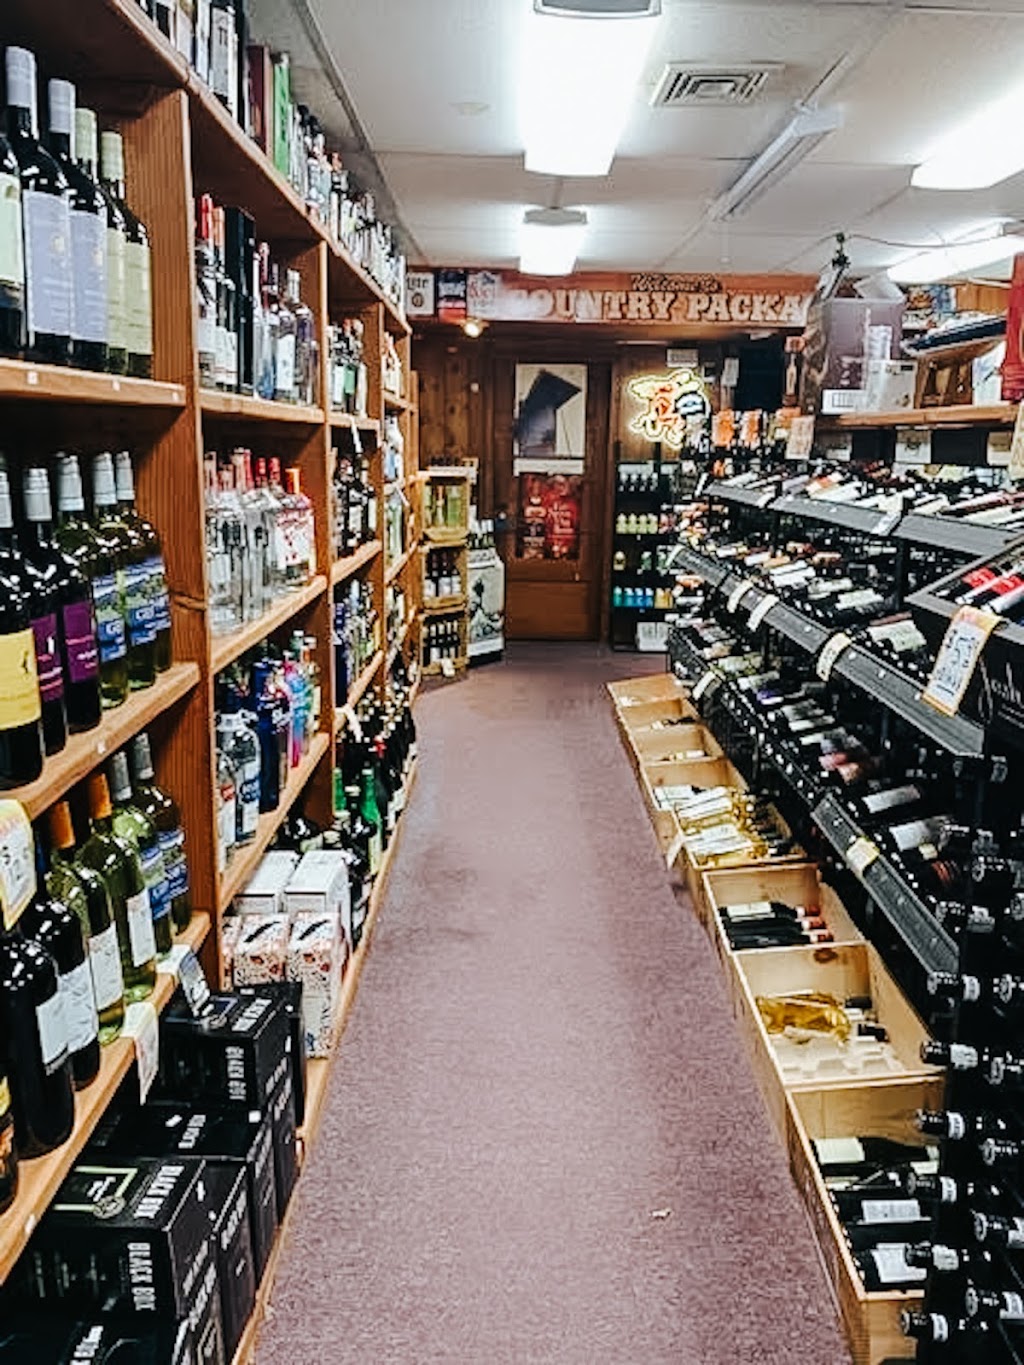 Country Package Store | 256 CT-81, Killingworth, CT 06419 | Phone: (860) 663-1698